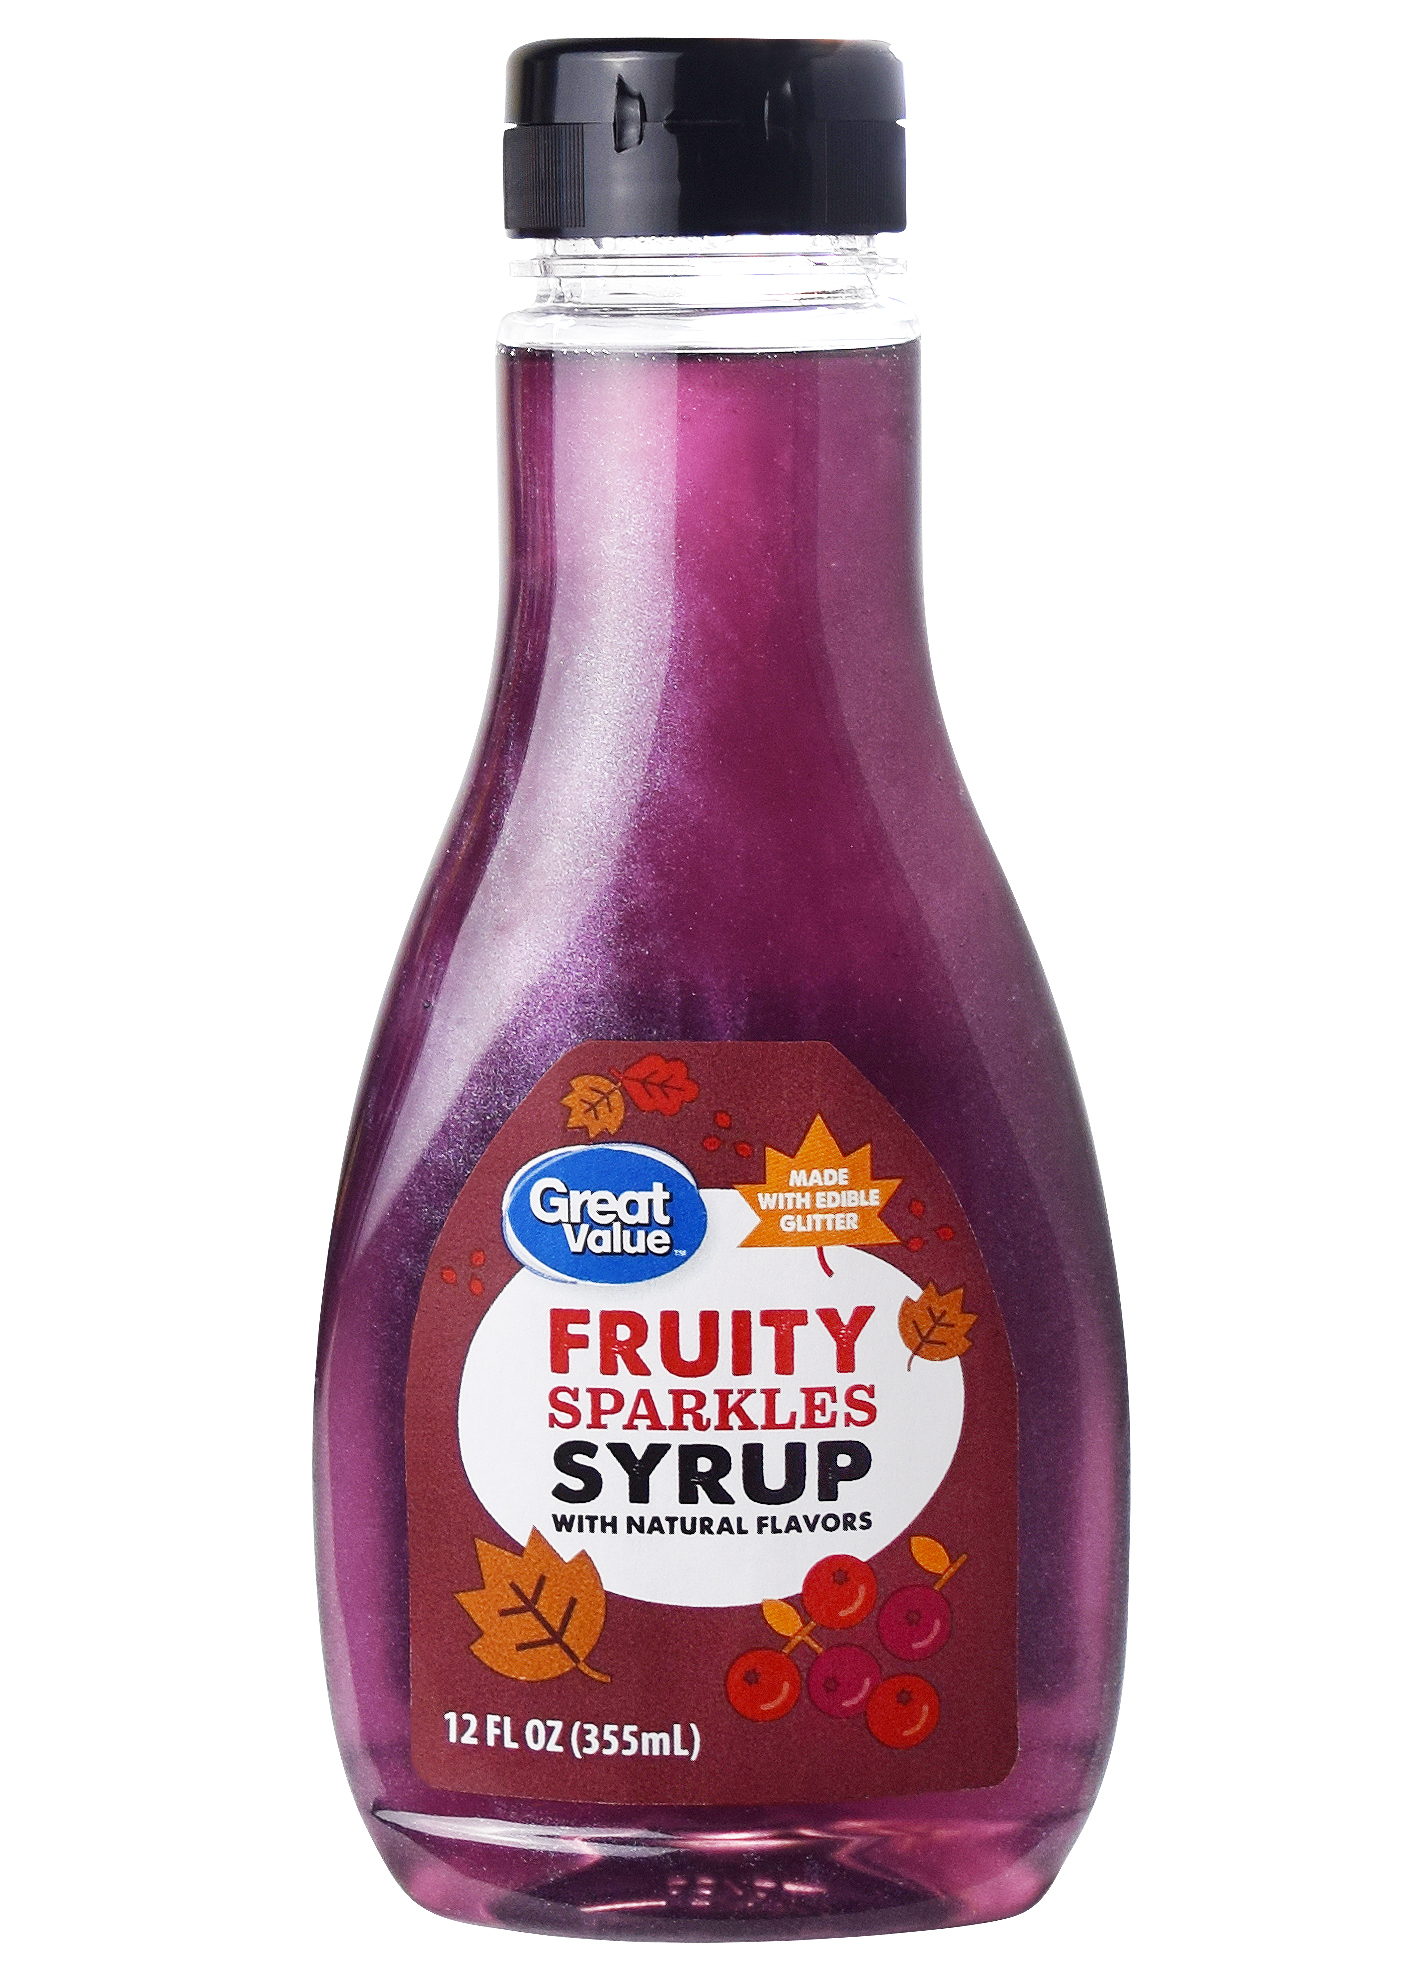 GV Fruity Sparkles Syrup - image 1 of 3